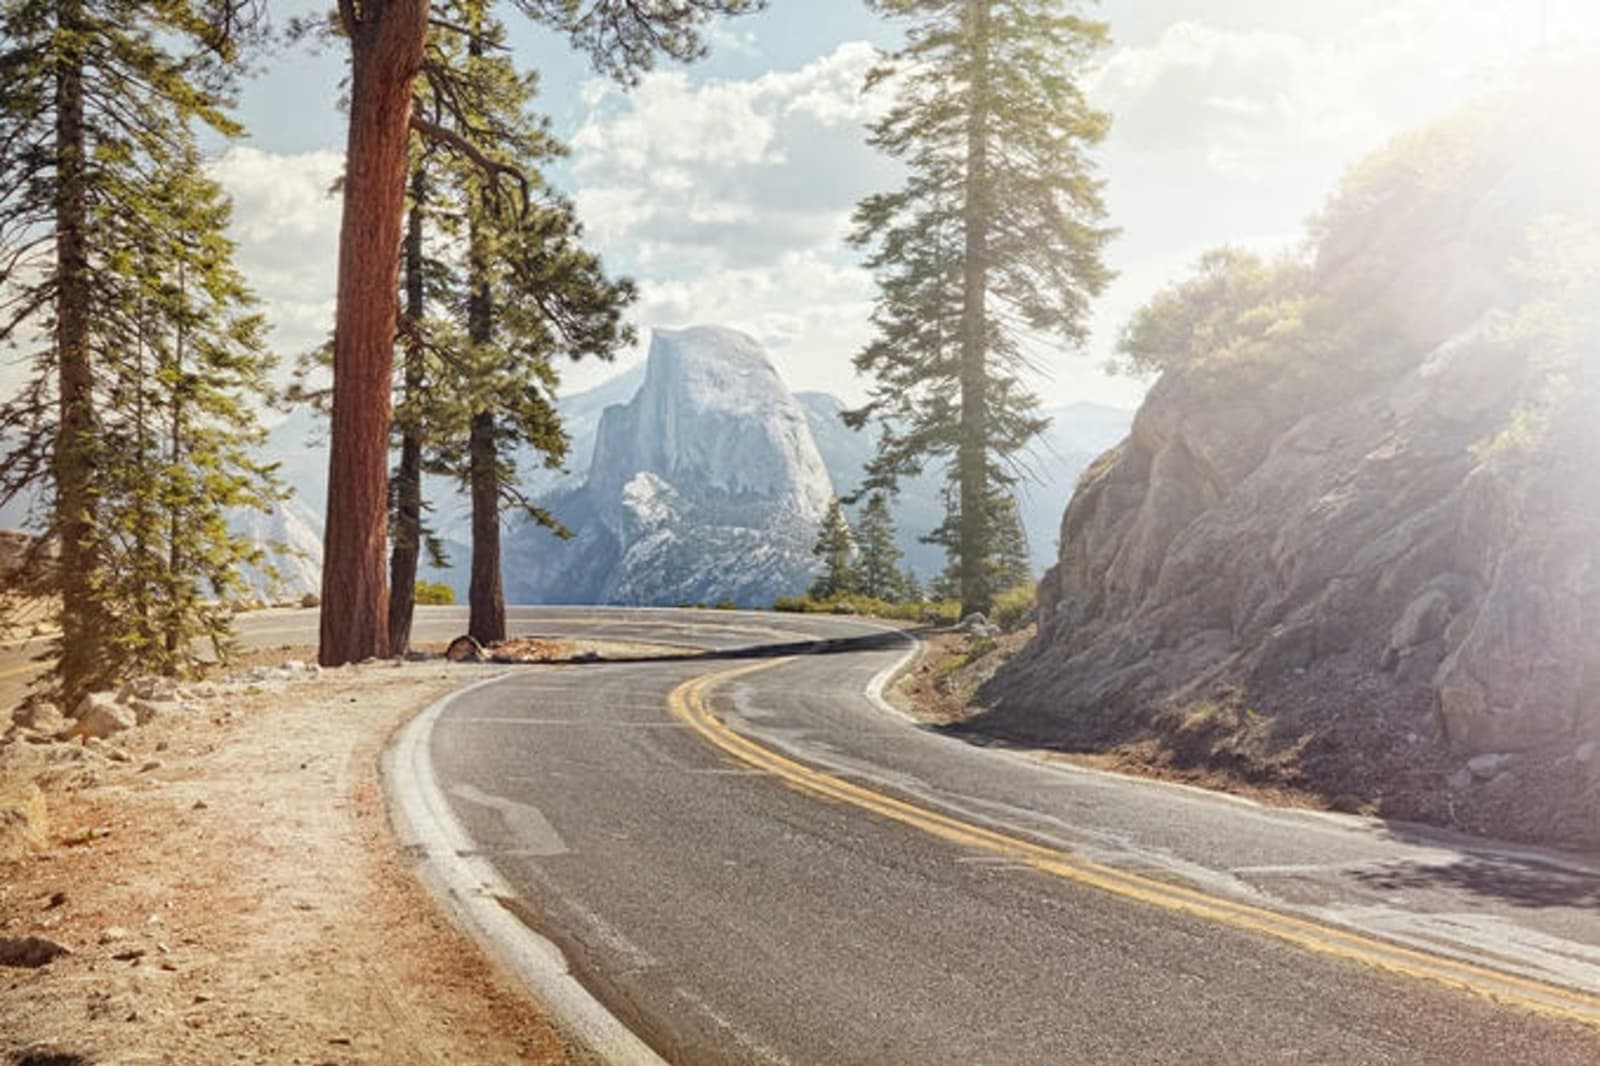 rs-4-wheres-safe-to-travel-yosemite-usa-gettyimages-565788073.jpg